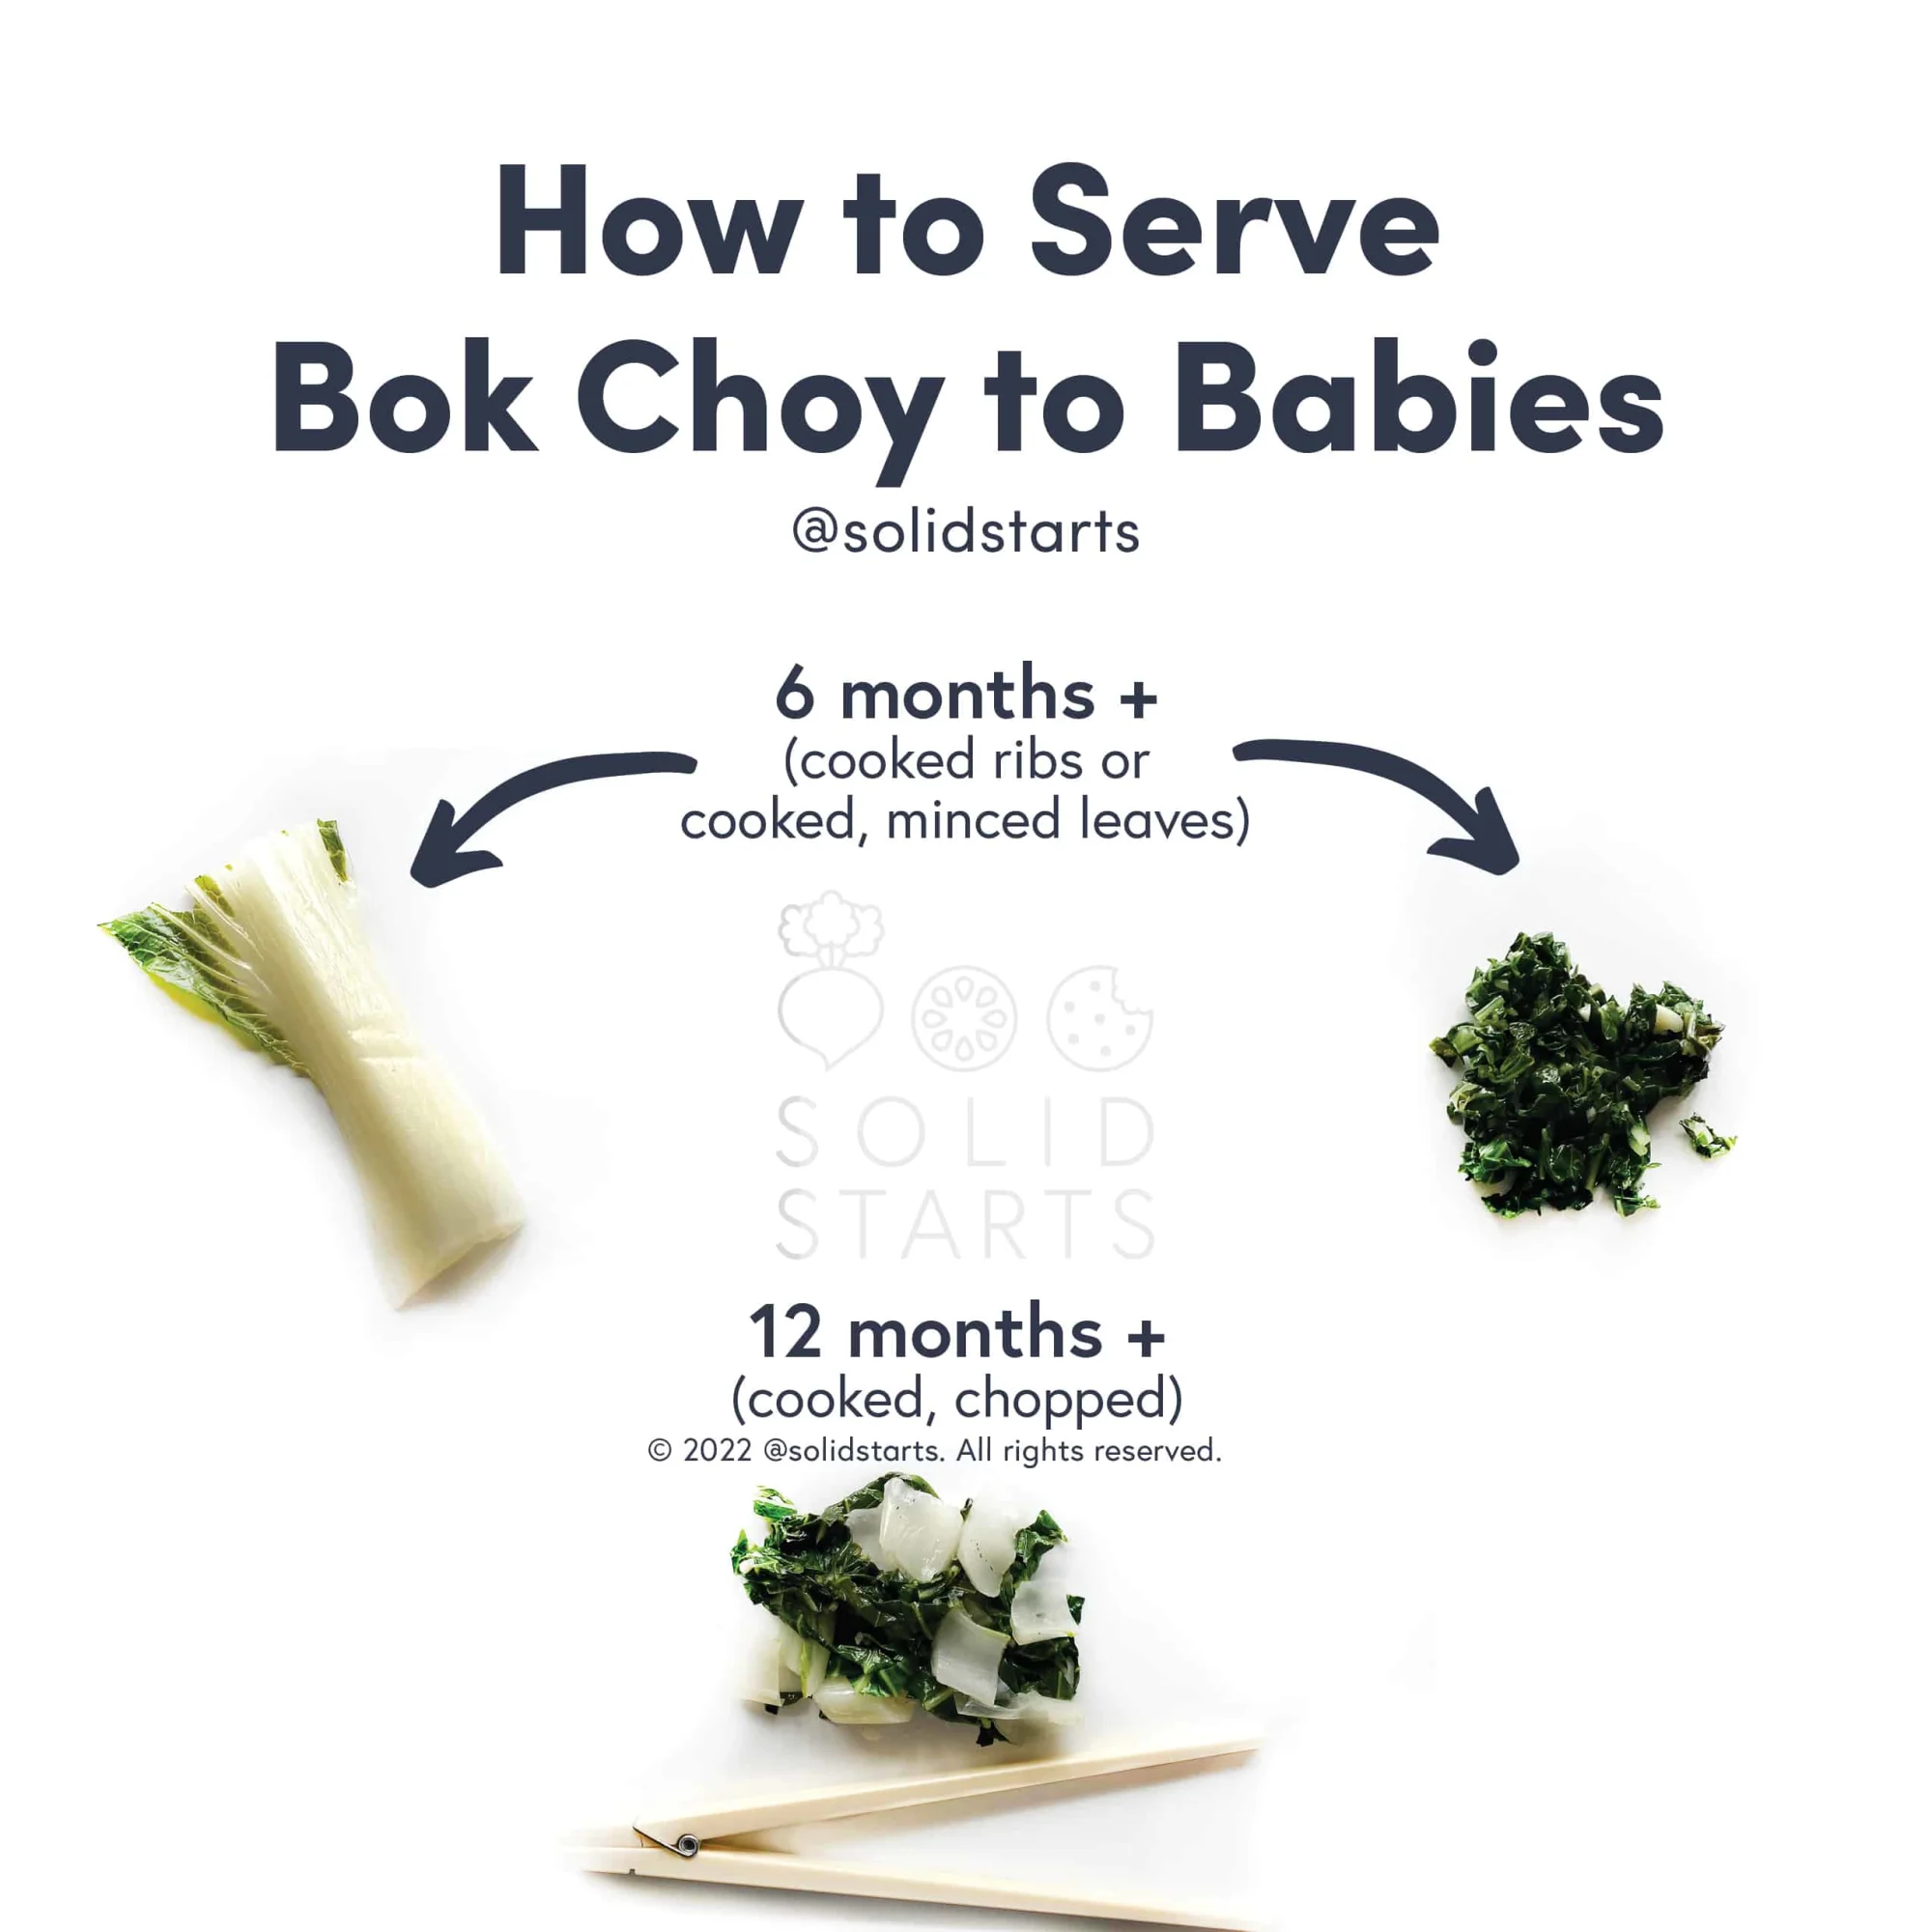 a Solid Starts infographic with the header How to Serve Bok Choy to Babies: cooked ribs or cooked, minced greens for 6 months+, cooked and chopped for 12 mos+